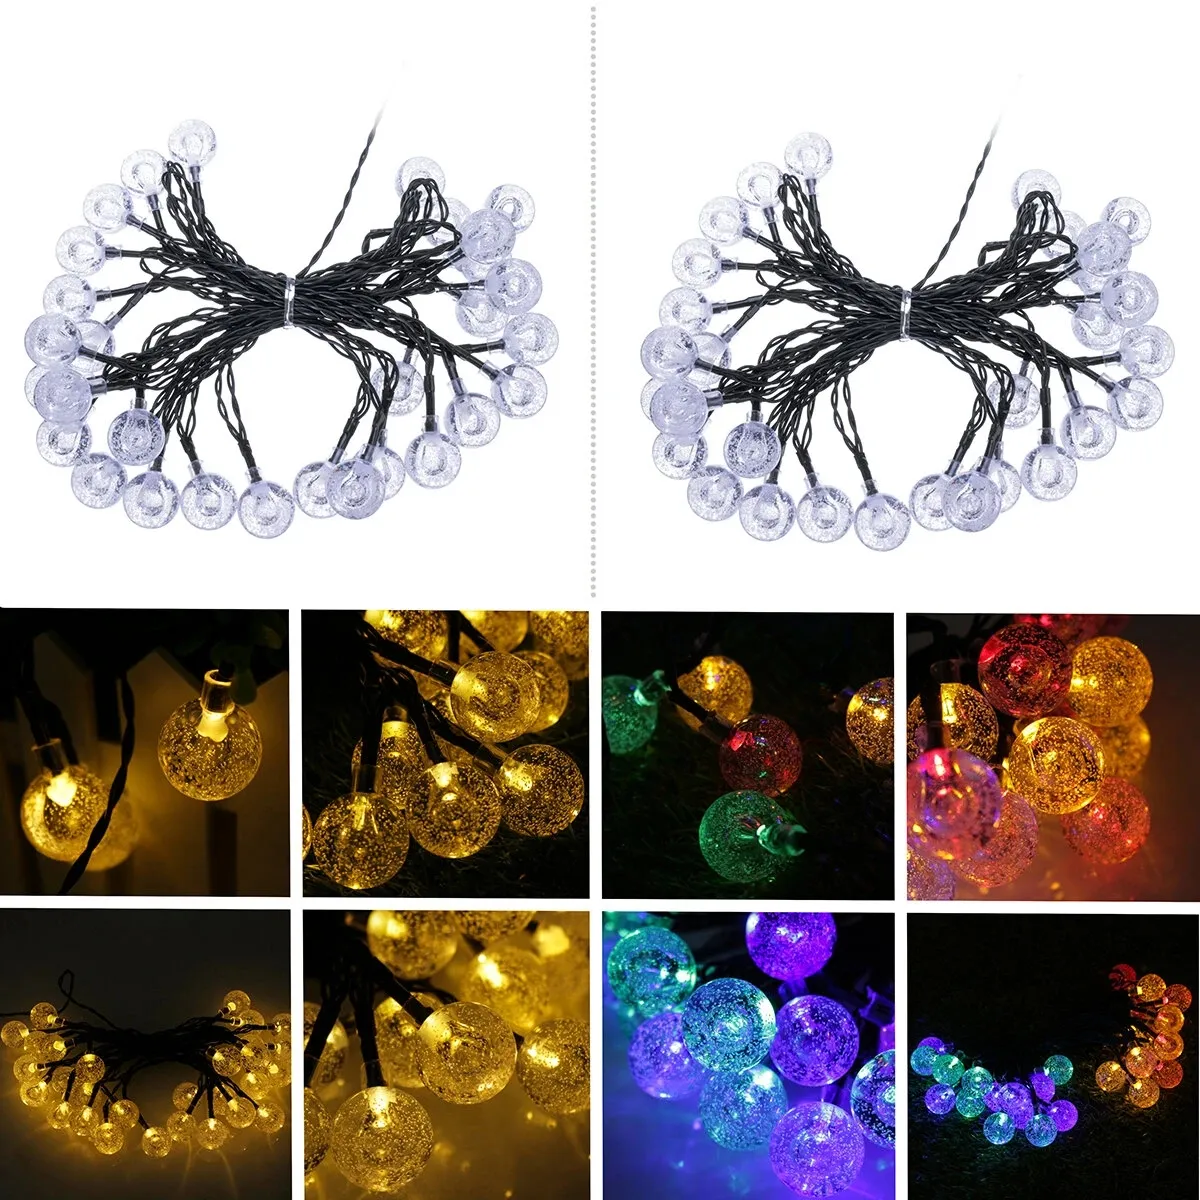 6.5M 30 LED Solar String Ball Lights Outdoor Waterproof Warm White Garden Christmas Tree Decorations